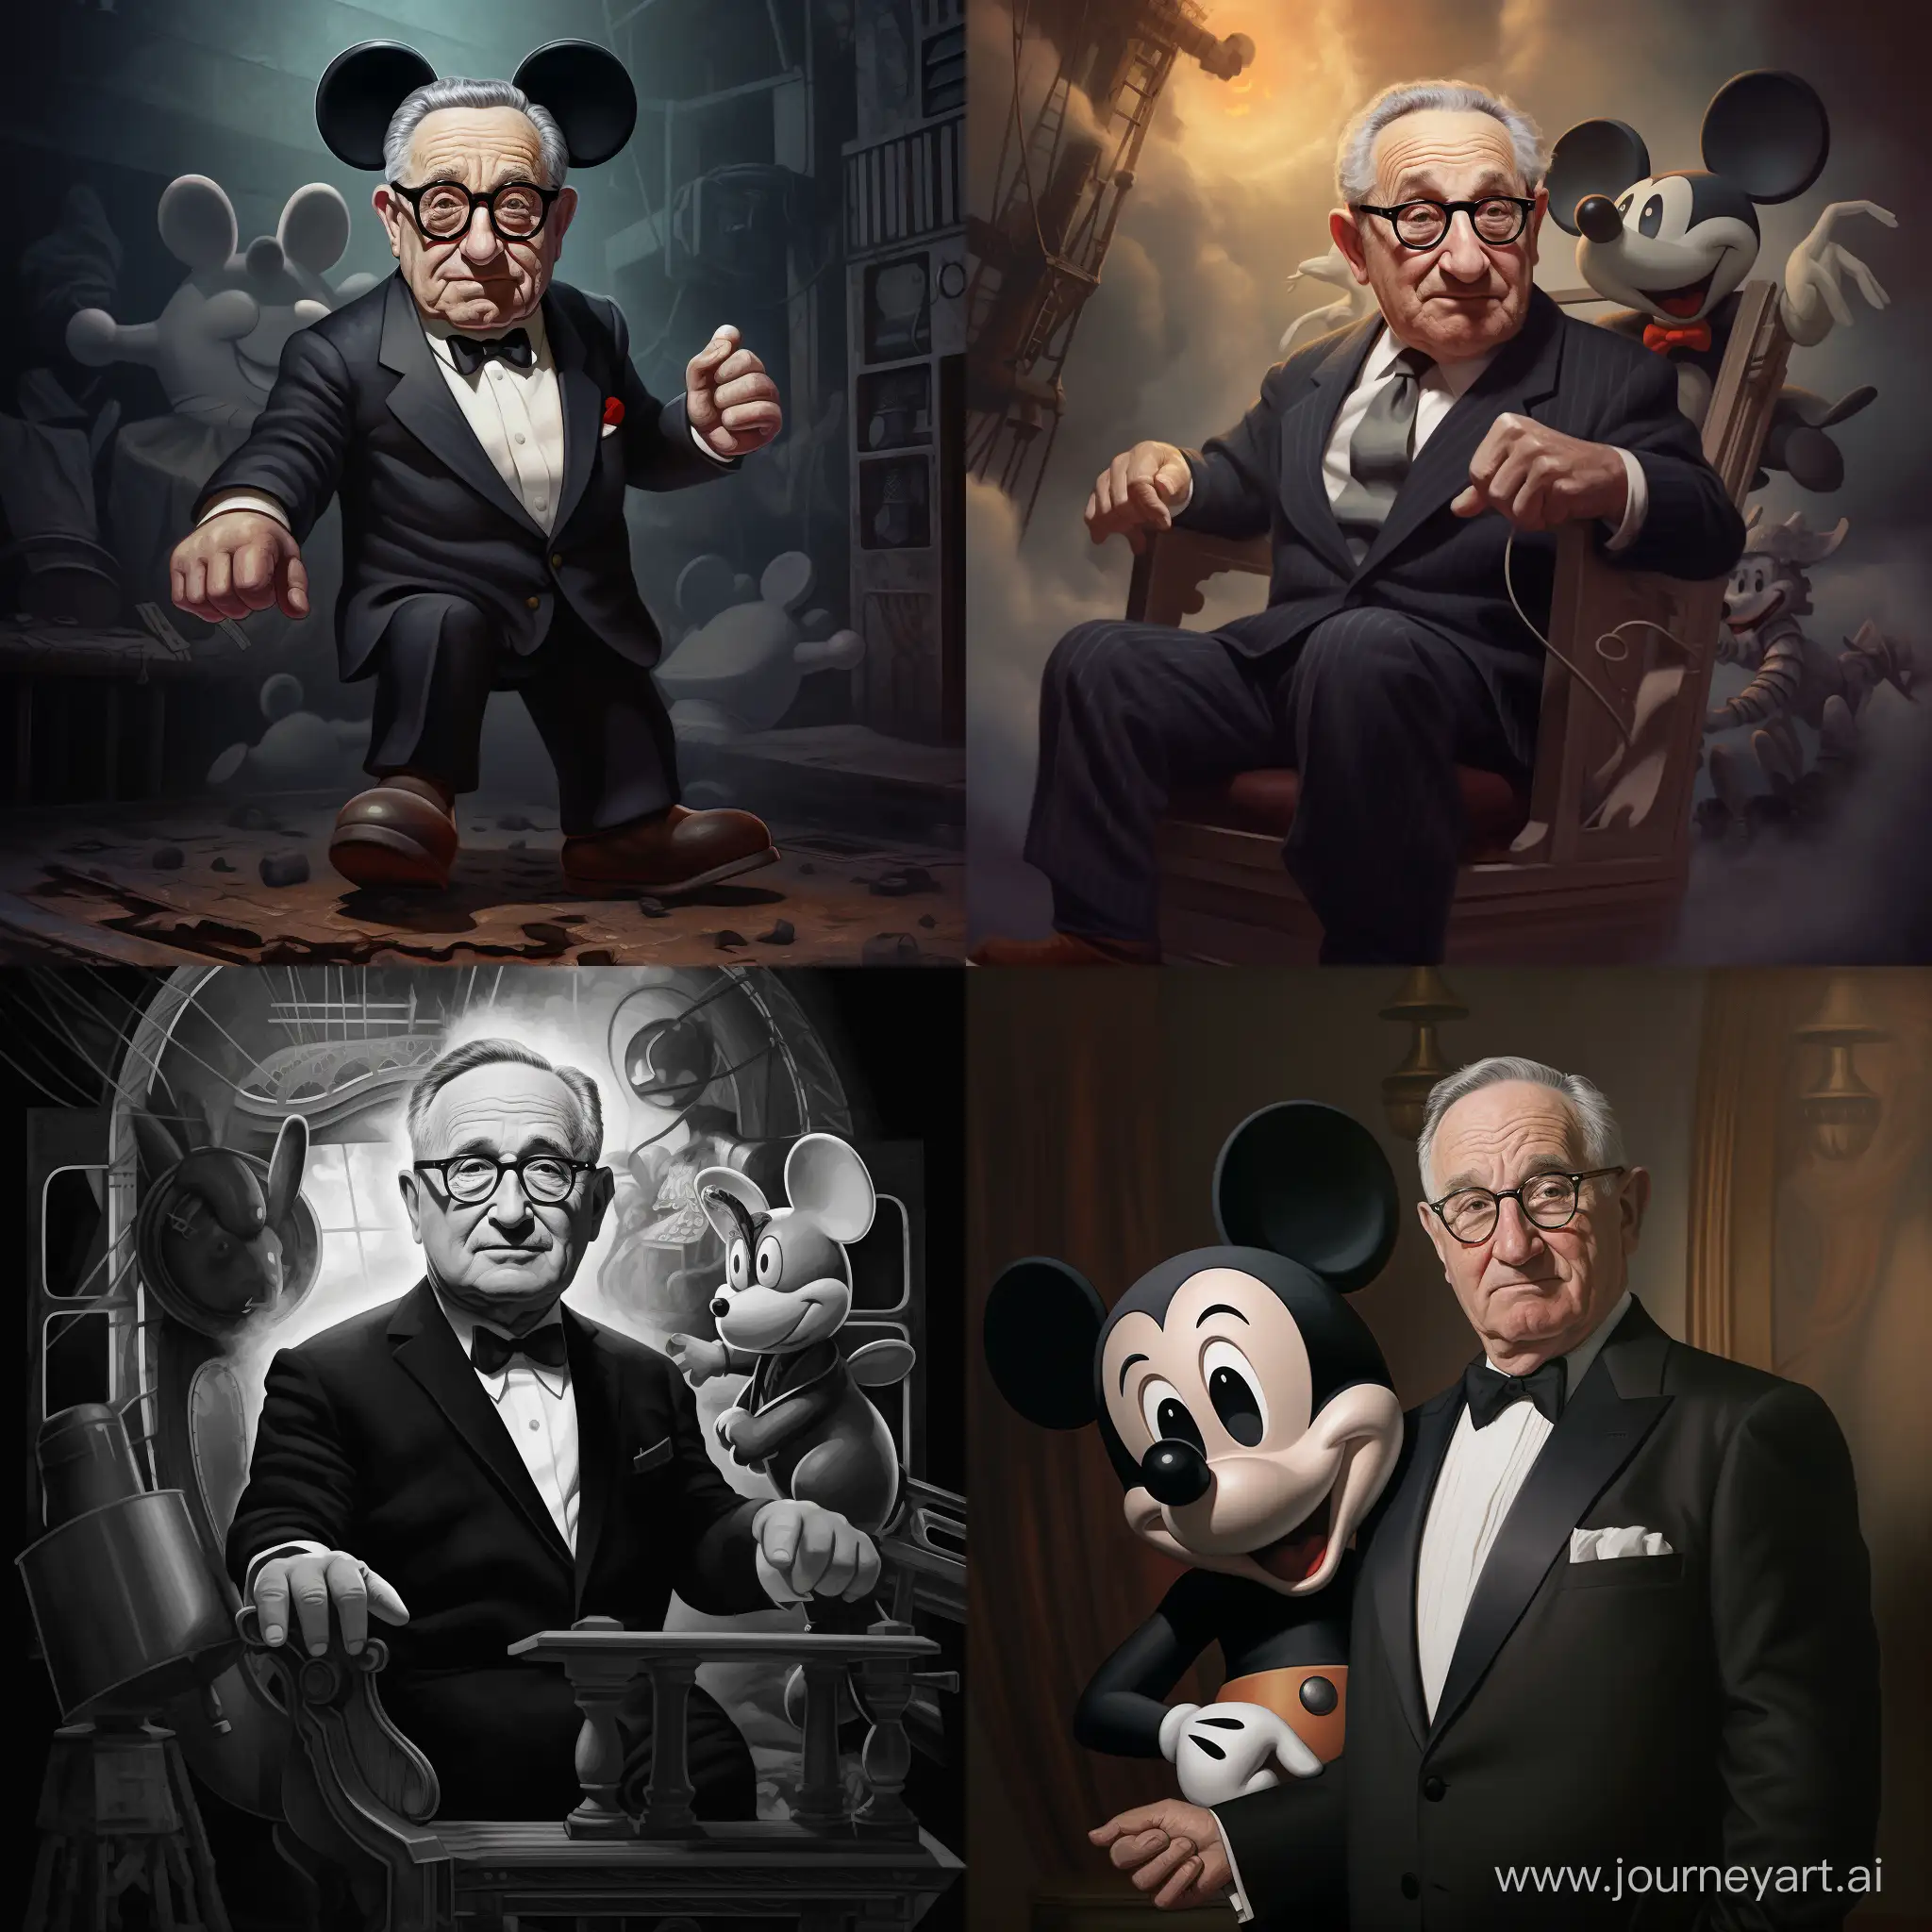 Steamboat Willie combined with Henry Kissinger